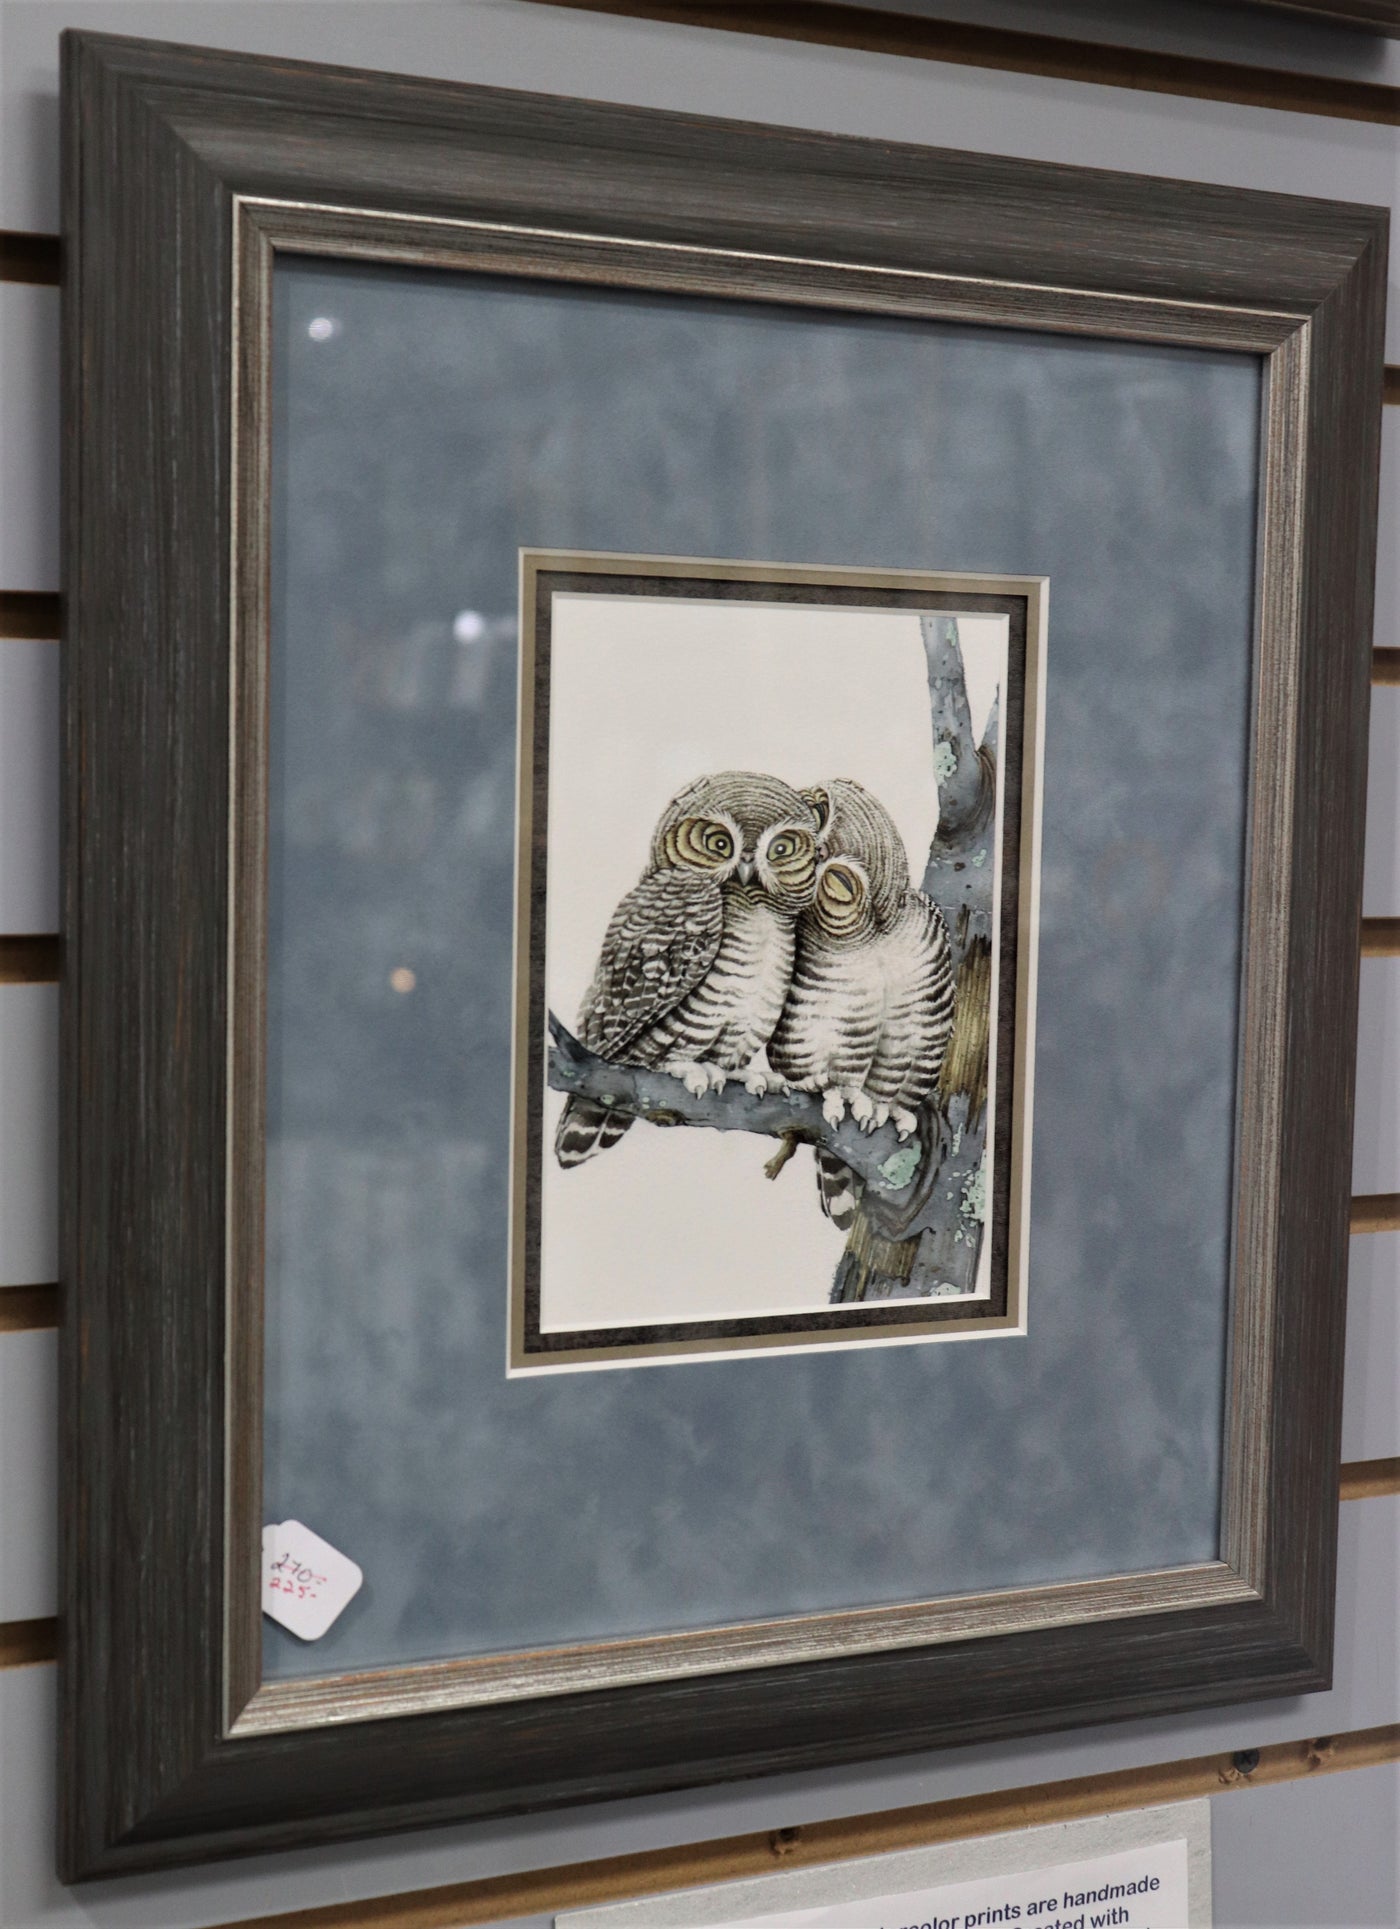 Cuddling Owls- Giclee Watercolor Painting